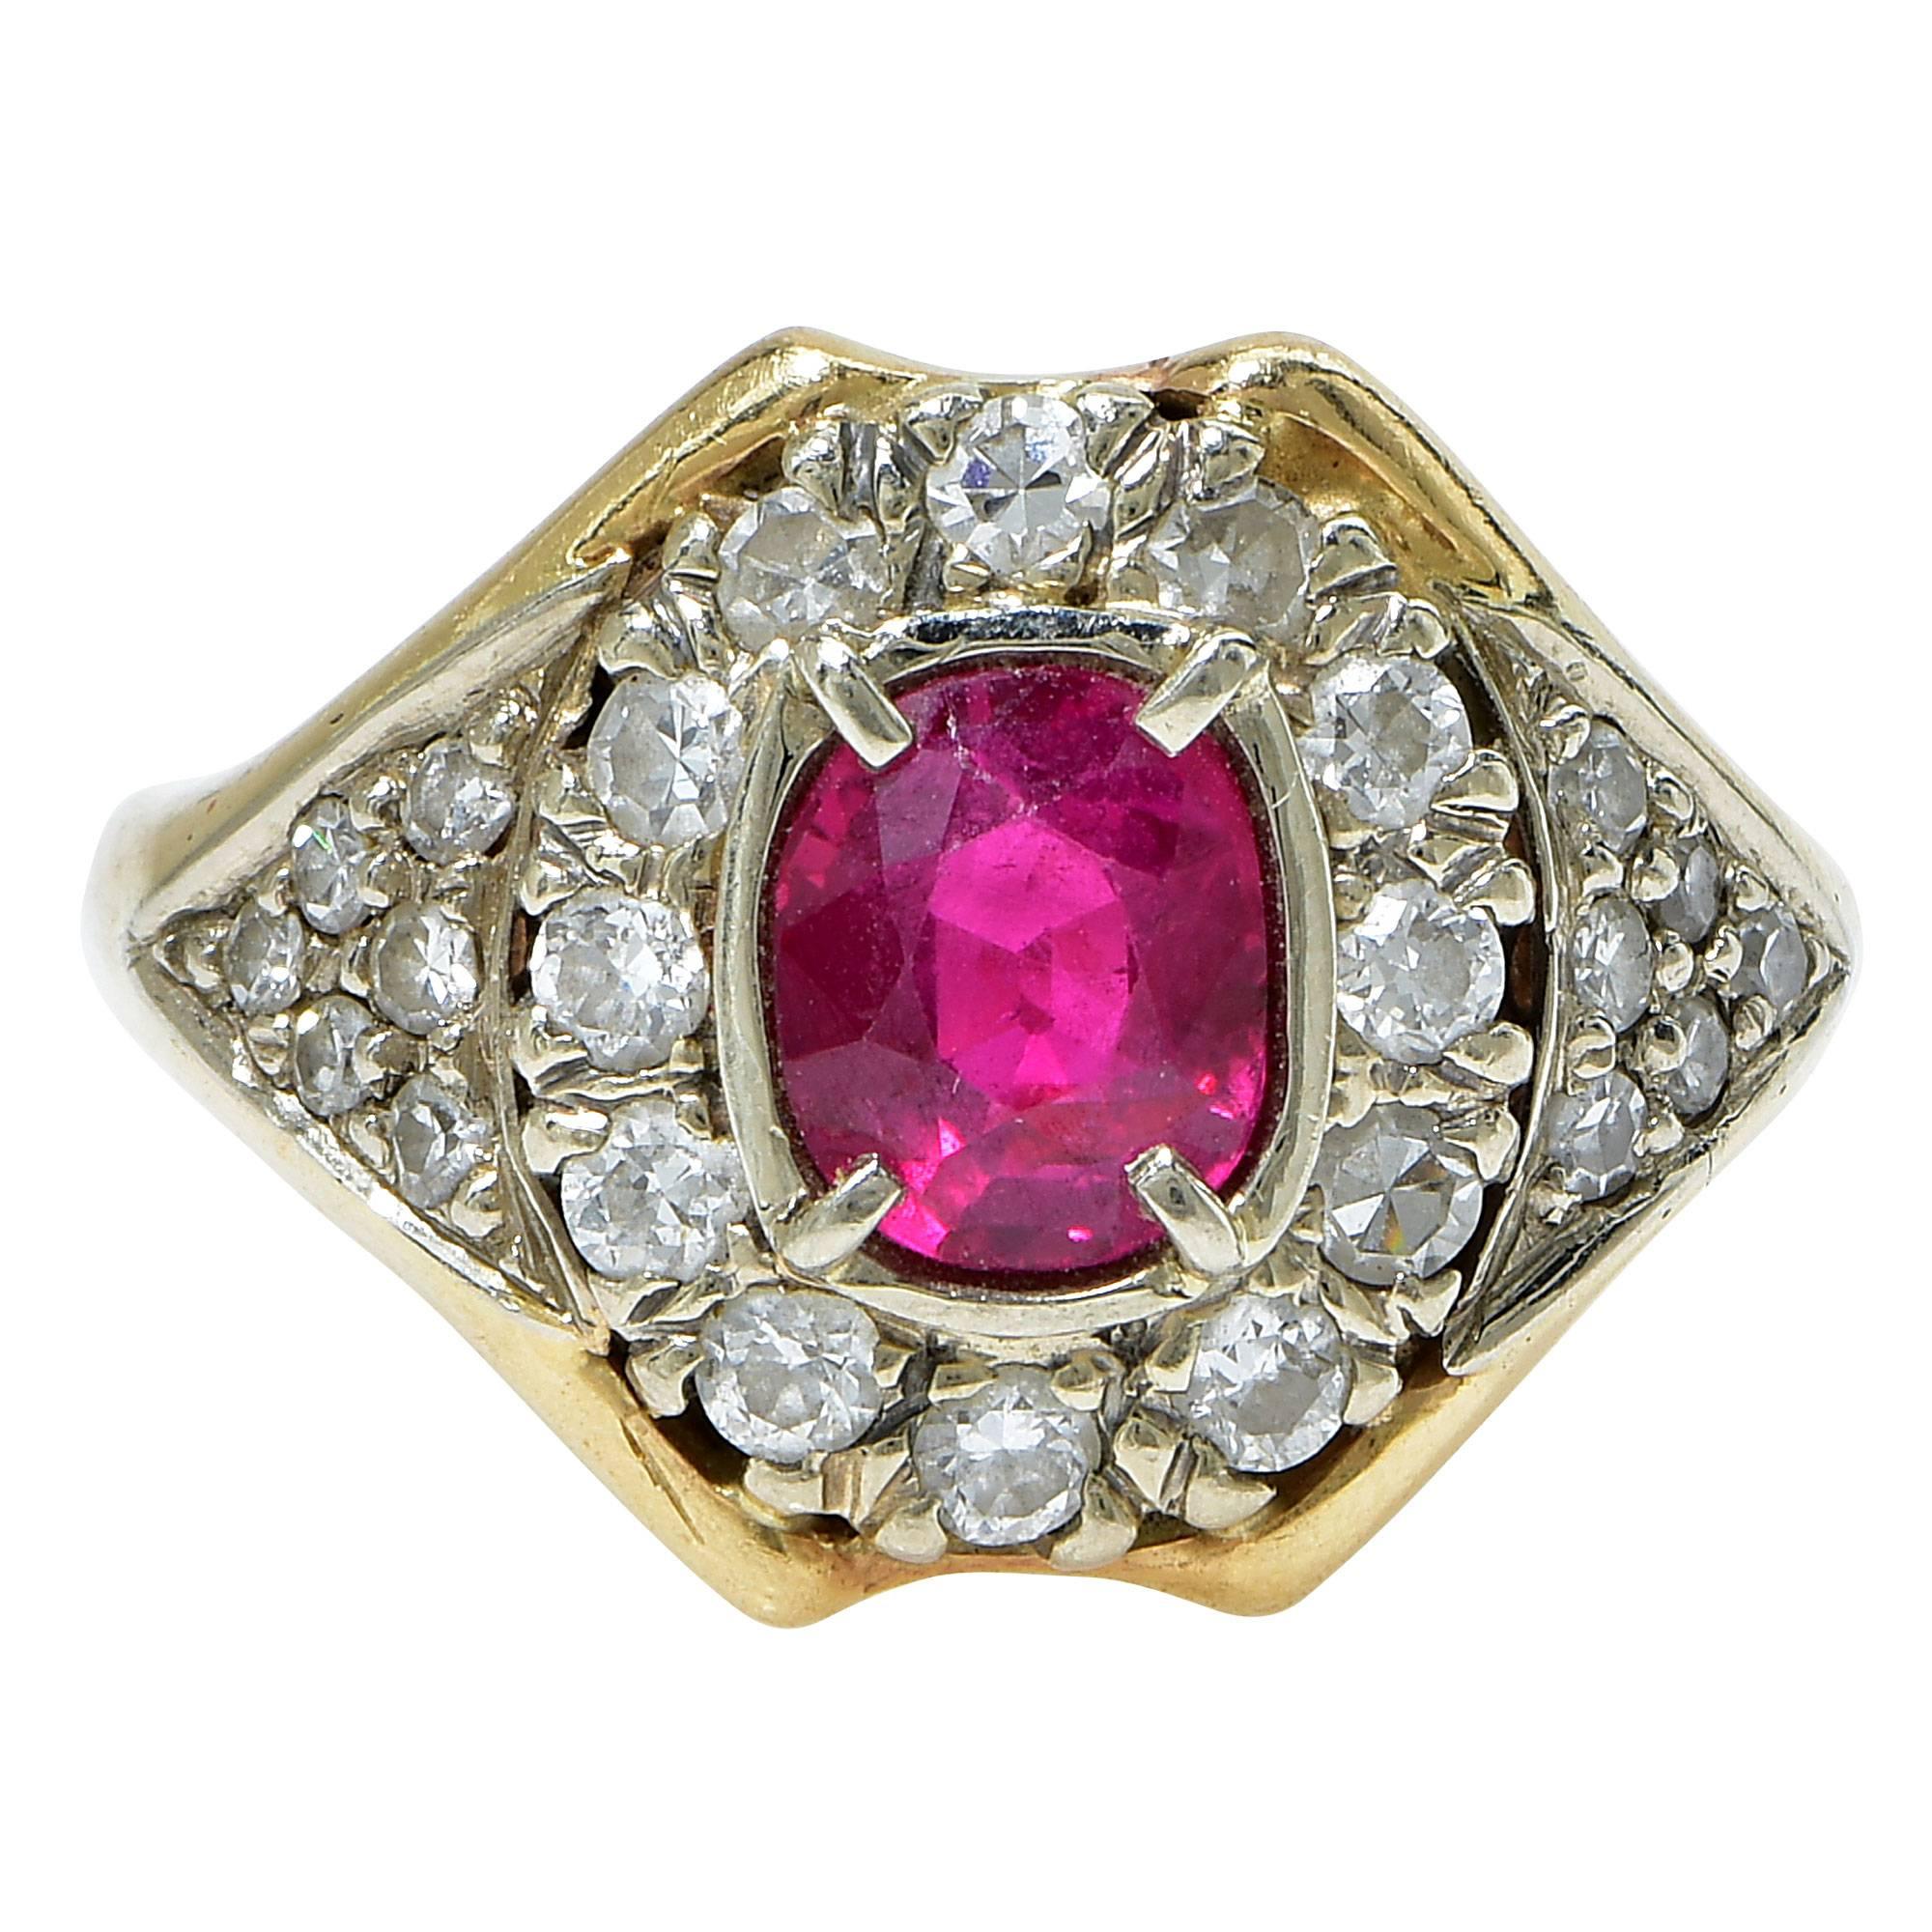 This sweet period ring features an oval cut Burma ruby surrounded by 24 single cut diamonds set in 18 karat yellow and white gold.

This ring is accompanied by an appraisal signed by a GIA Graduate Gemologist.